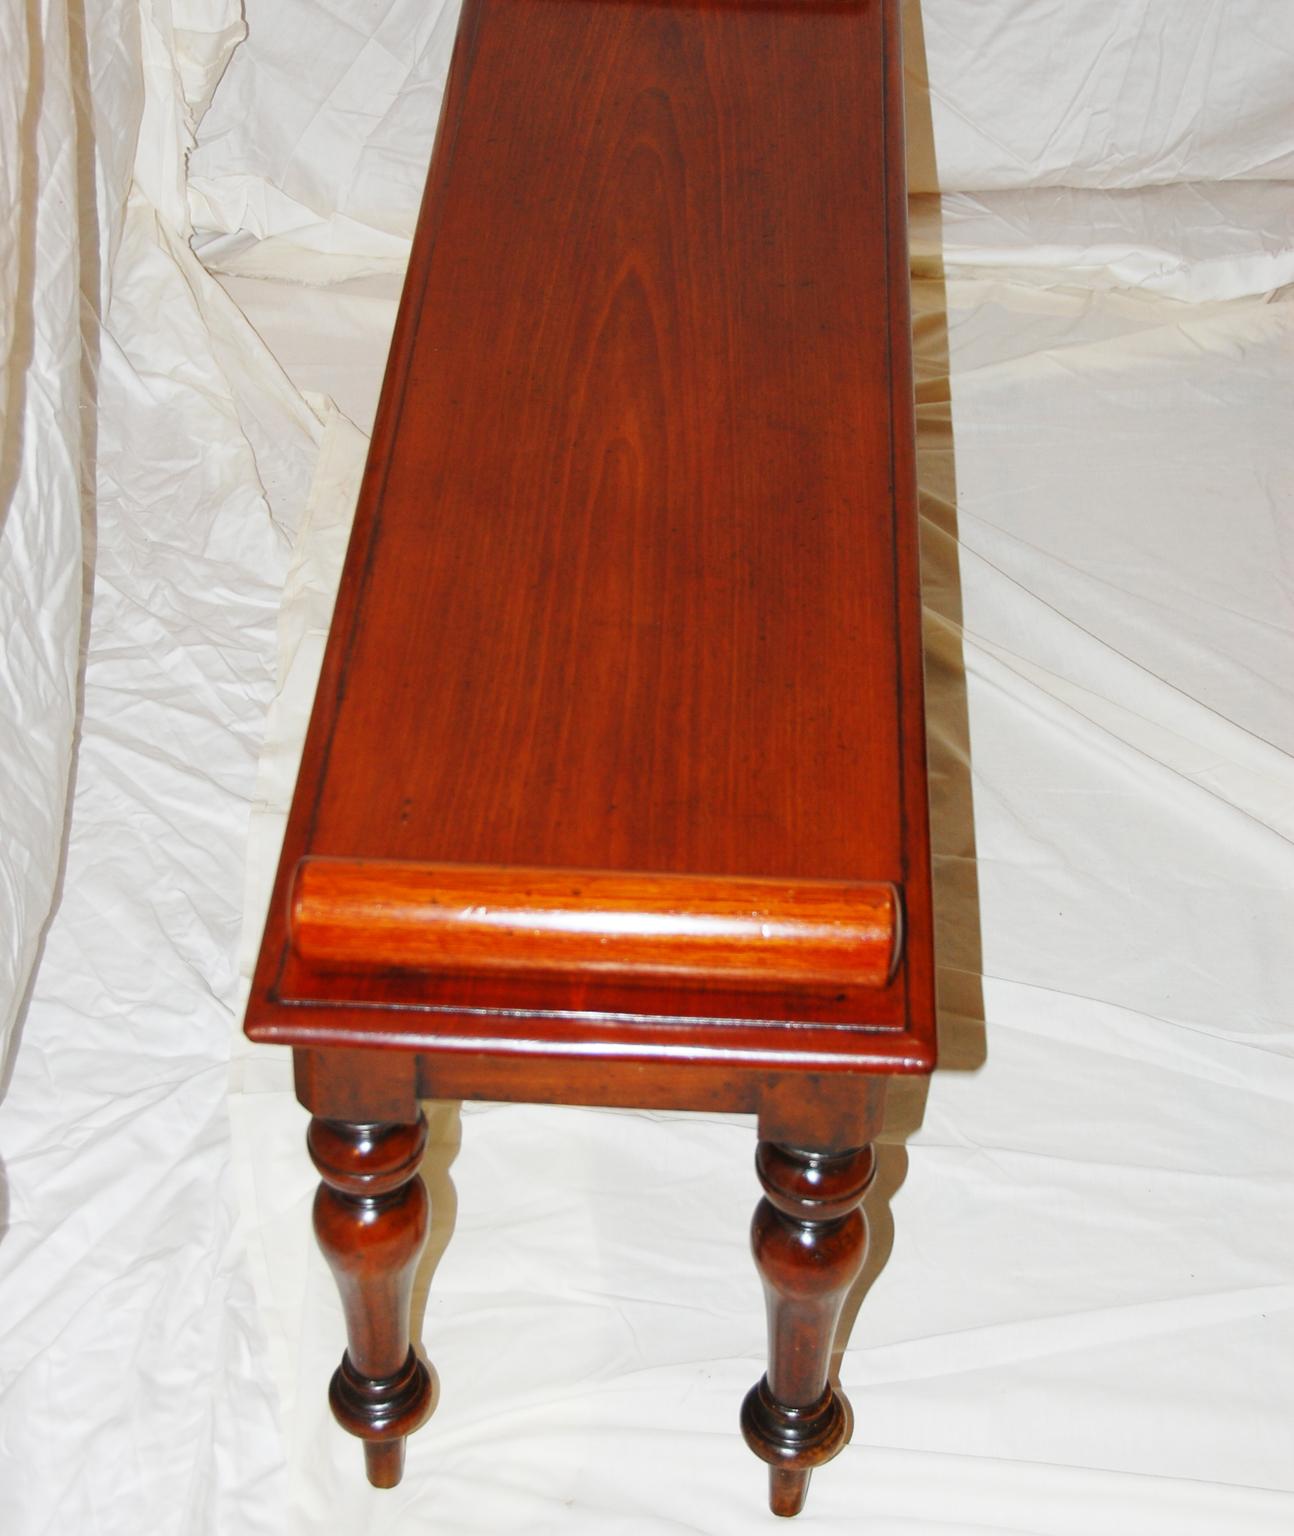 English 19th century walnut hall bench. This four foot long bench has nicely turned and tapered legs, single board seat which has two turned rolls, one at each end. These rolls not only gave a simple form more presence but also would hold a cushion